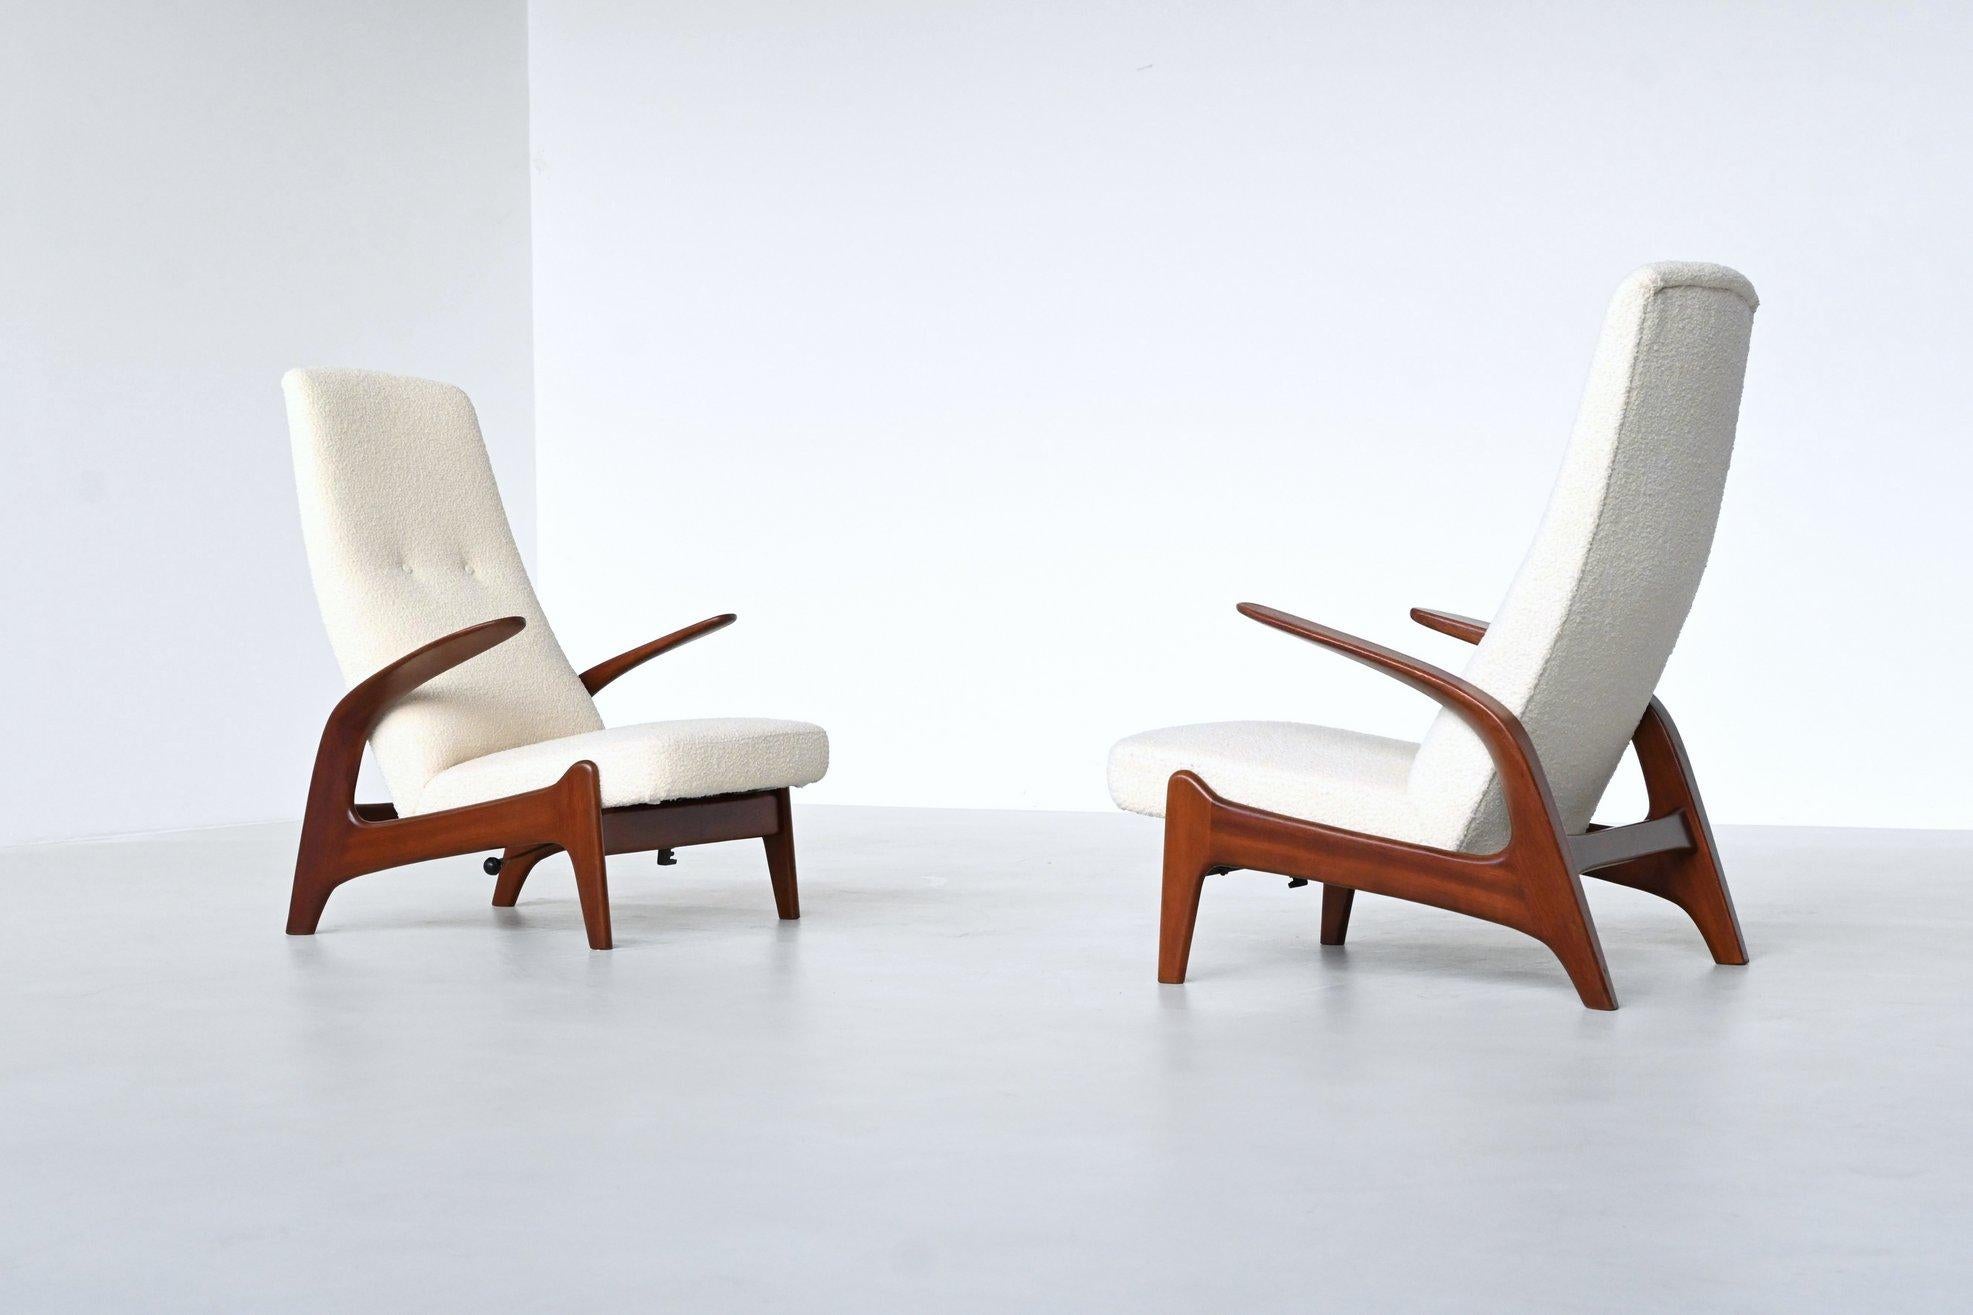 Fantastically shaped pair of reclining lounge chairs model Rock ‘n Rest designed in Norway by Rolf Rastad and Adolf Relling and manufactured in the UK by Gimson and Slater, 1960. These sculptural high back chairs feature a solid teak wooden frame